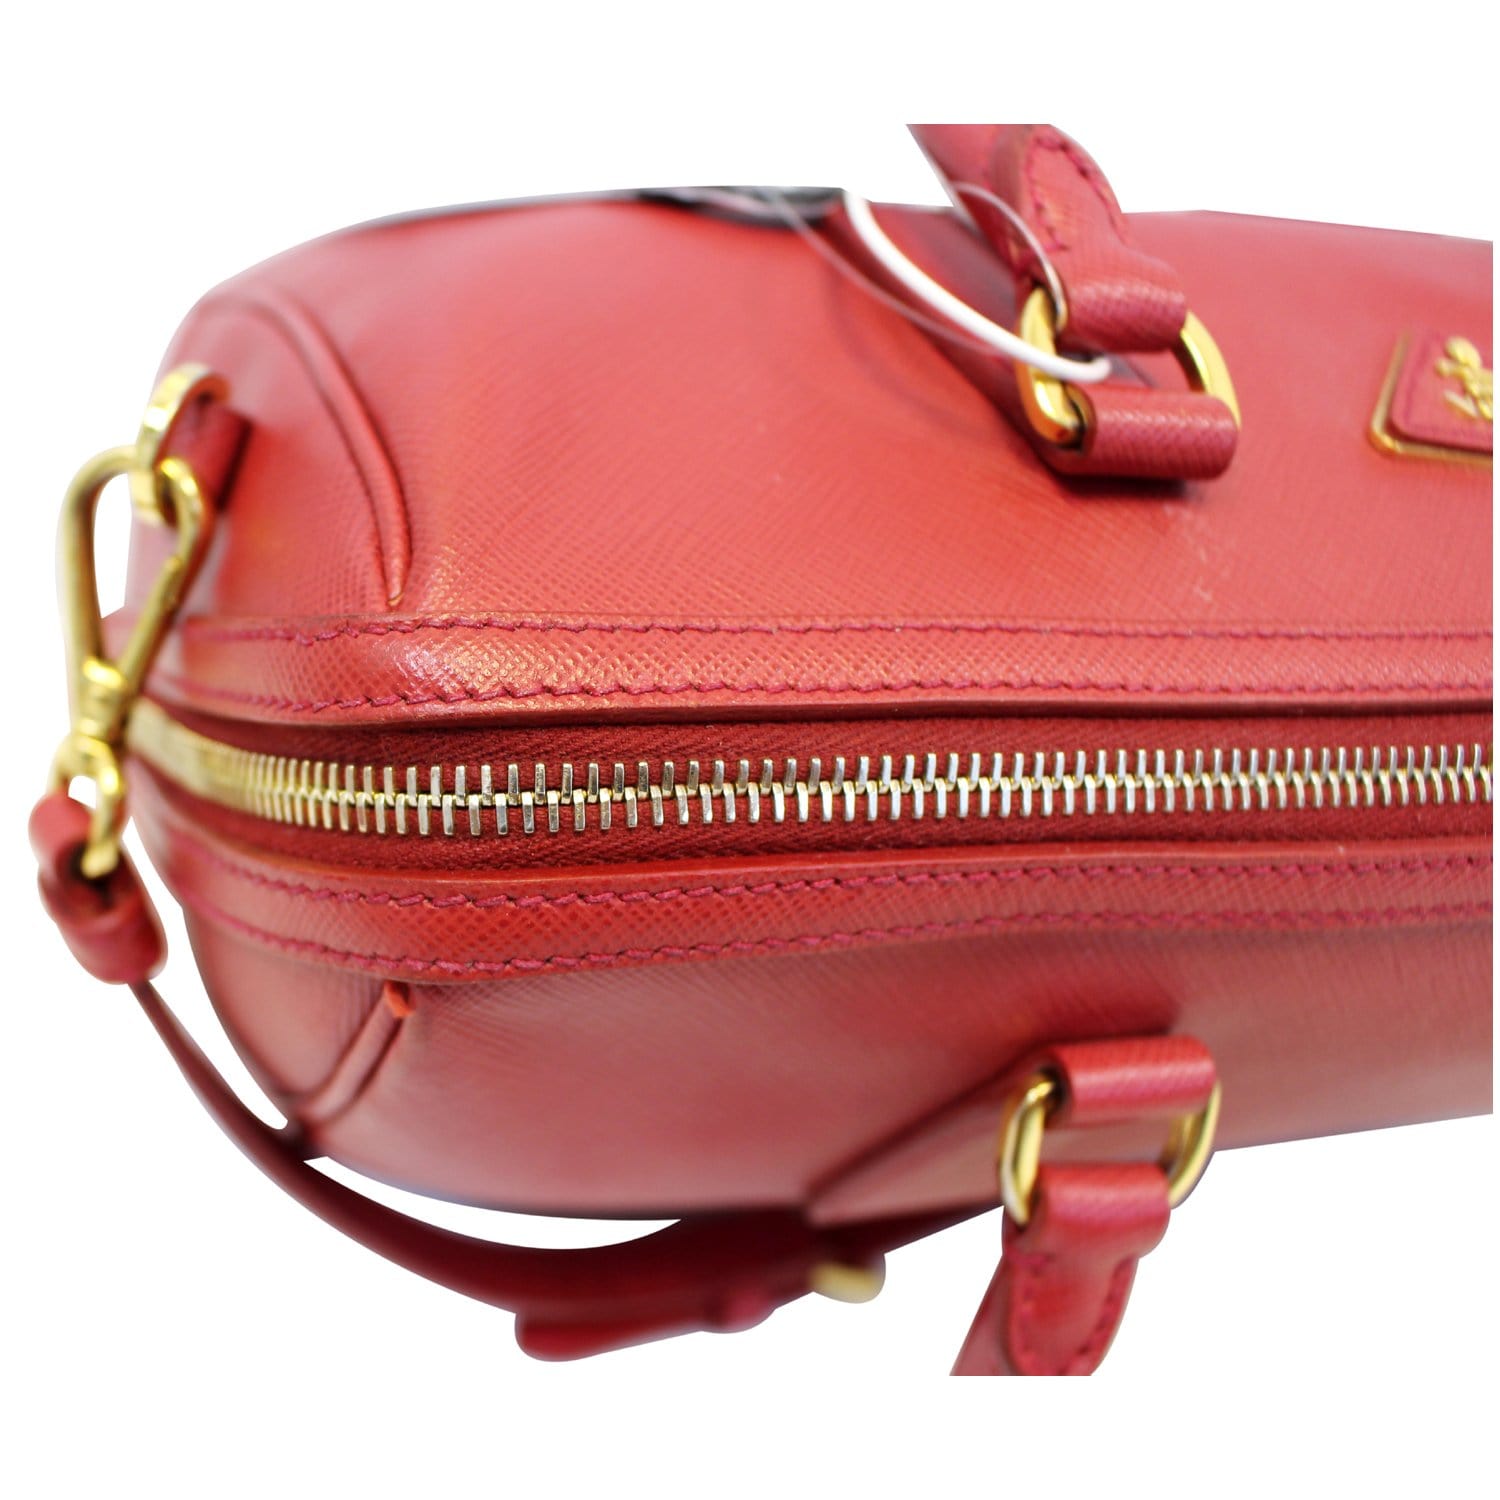 Prada Travel bag in Red Leather – Fancy Lux